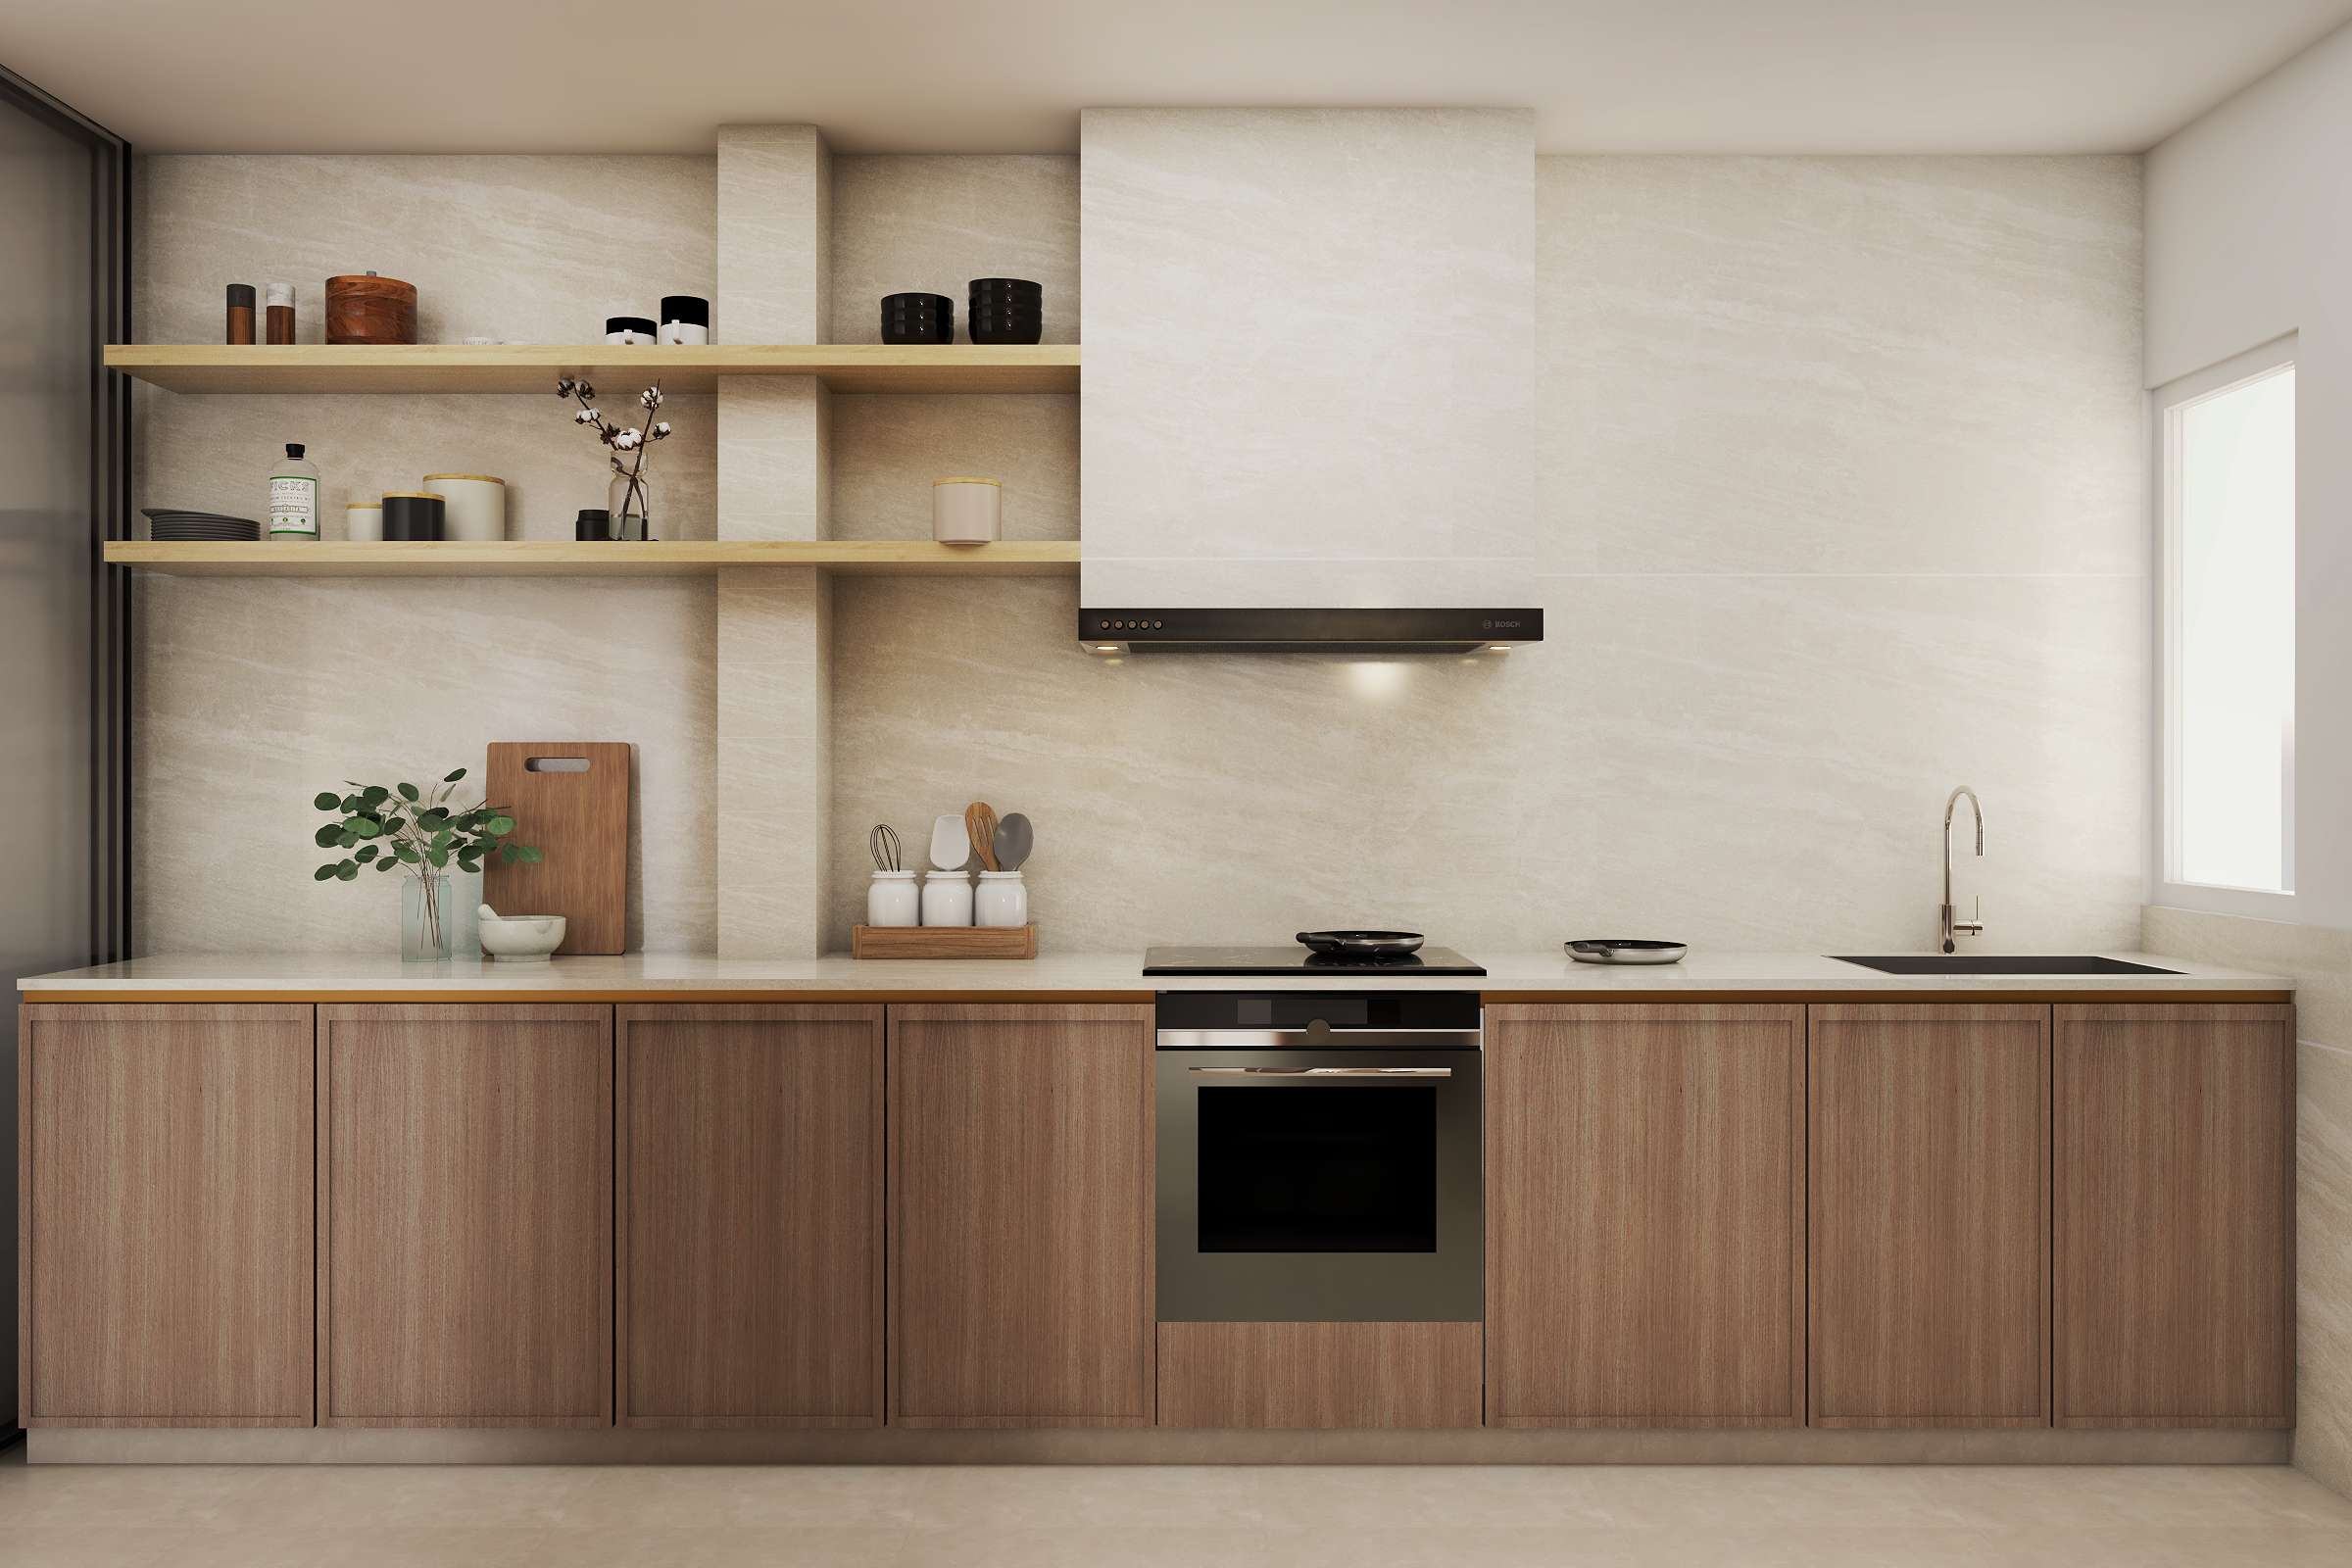 Contemporary Design For Kitchens With Open And Closed Storage